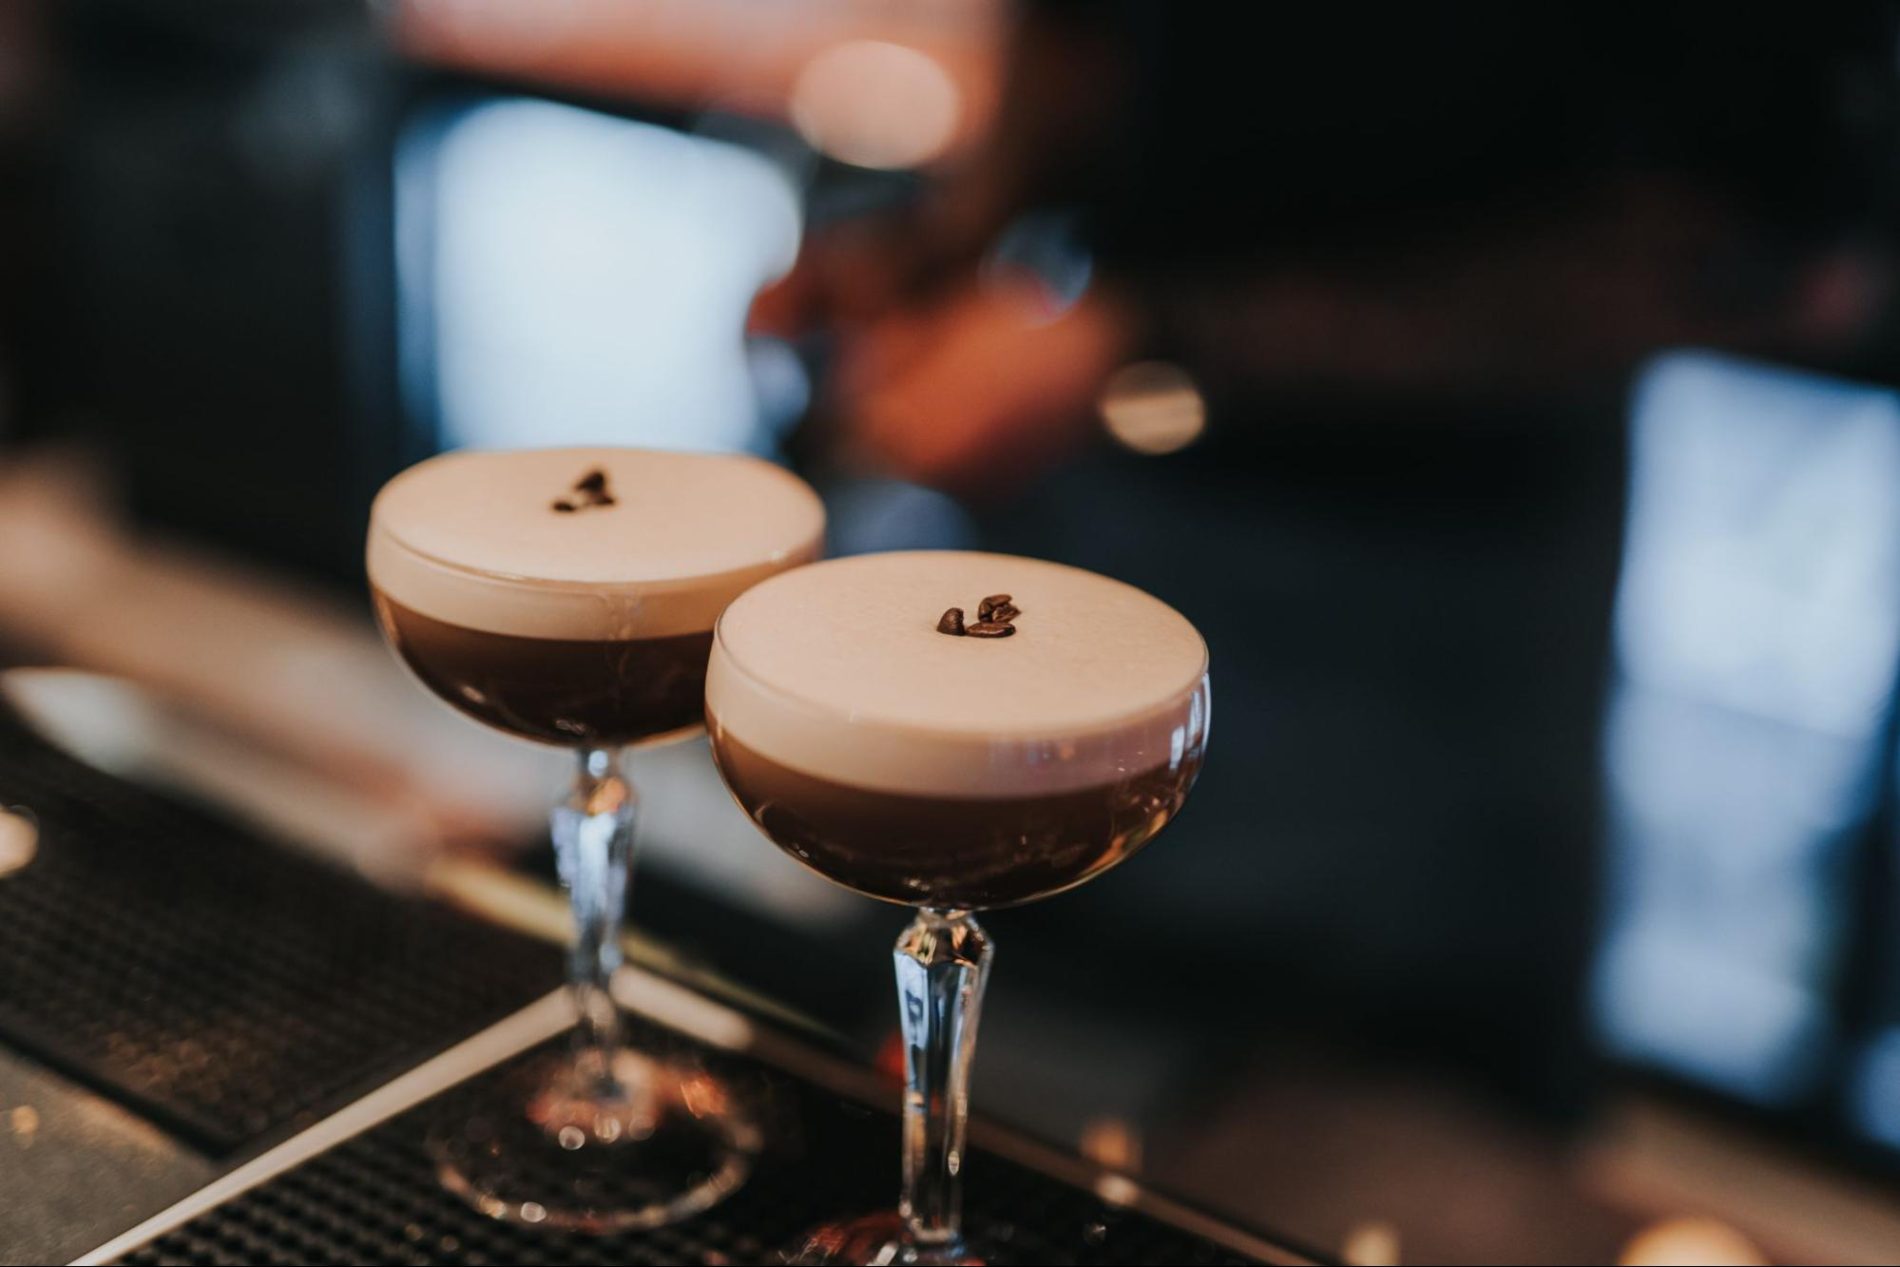 Espresso Martini - Invigorating Simple Cocktail With Only 3 Ingredients